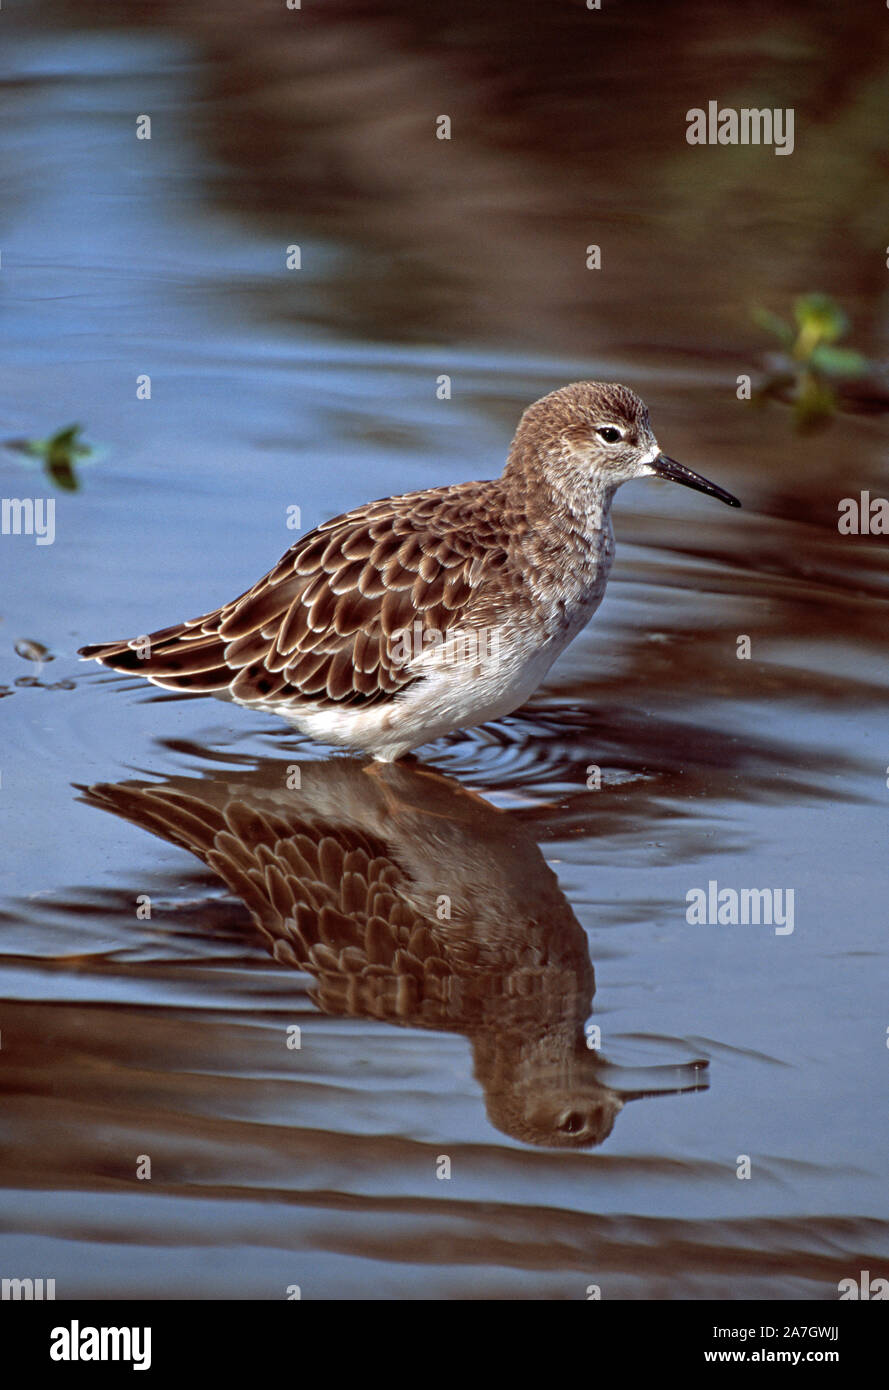 RUFF (Philomachus pugnax). In winter plumage. Male. Standing, walking in shallow water, with reflection. Profile. Breeding season sexually dimorphic p Stock Photo